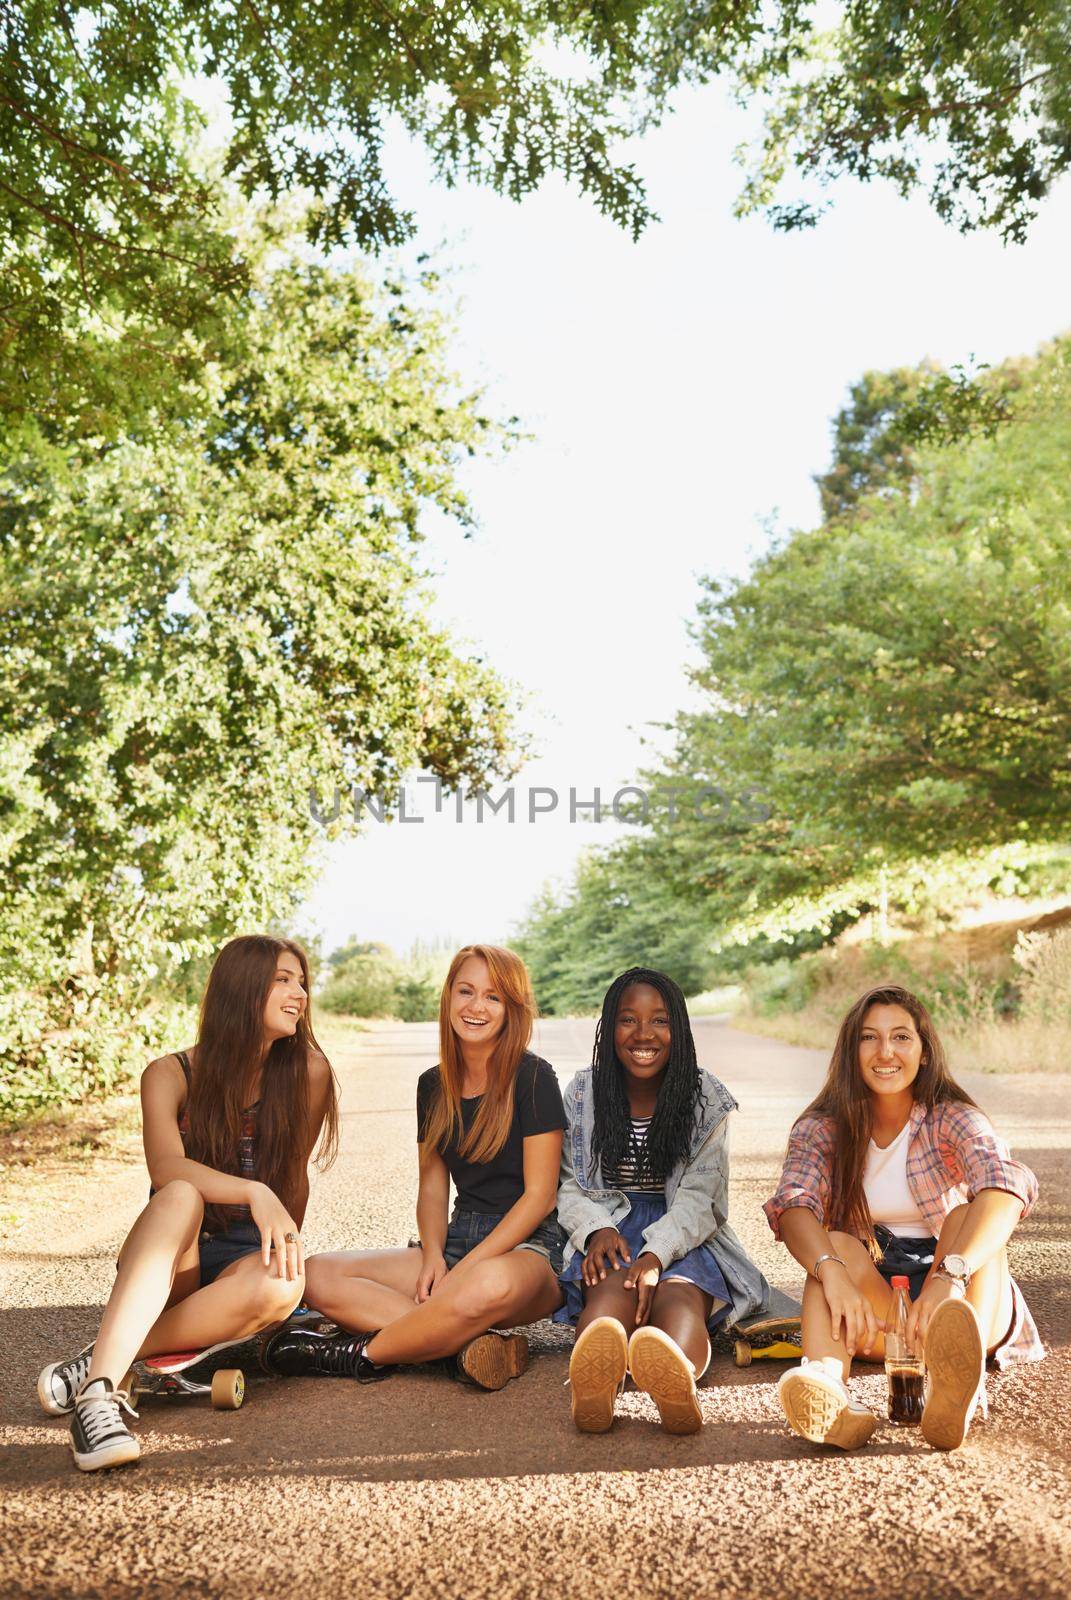 Laughter is an instant vacation. A group of multiracial teens sitting outdoors enjoying each others company